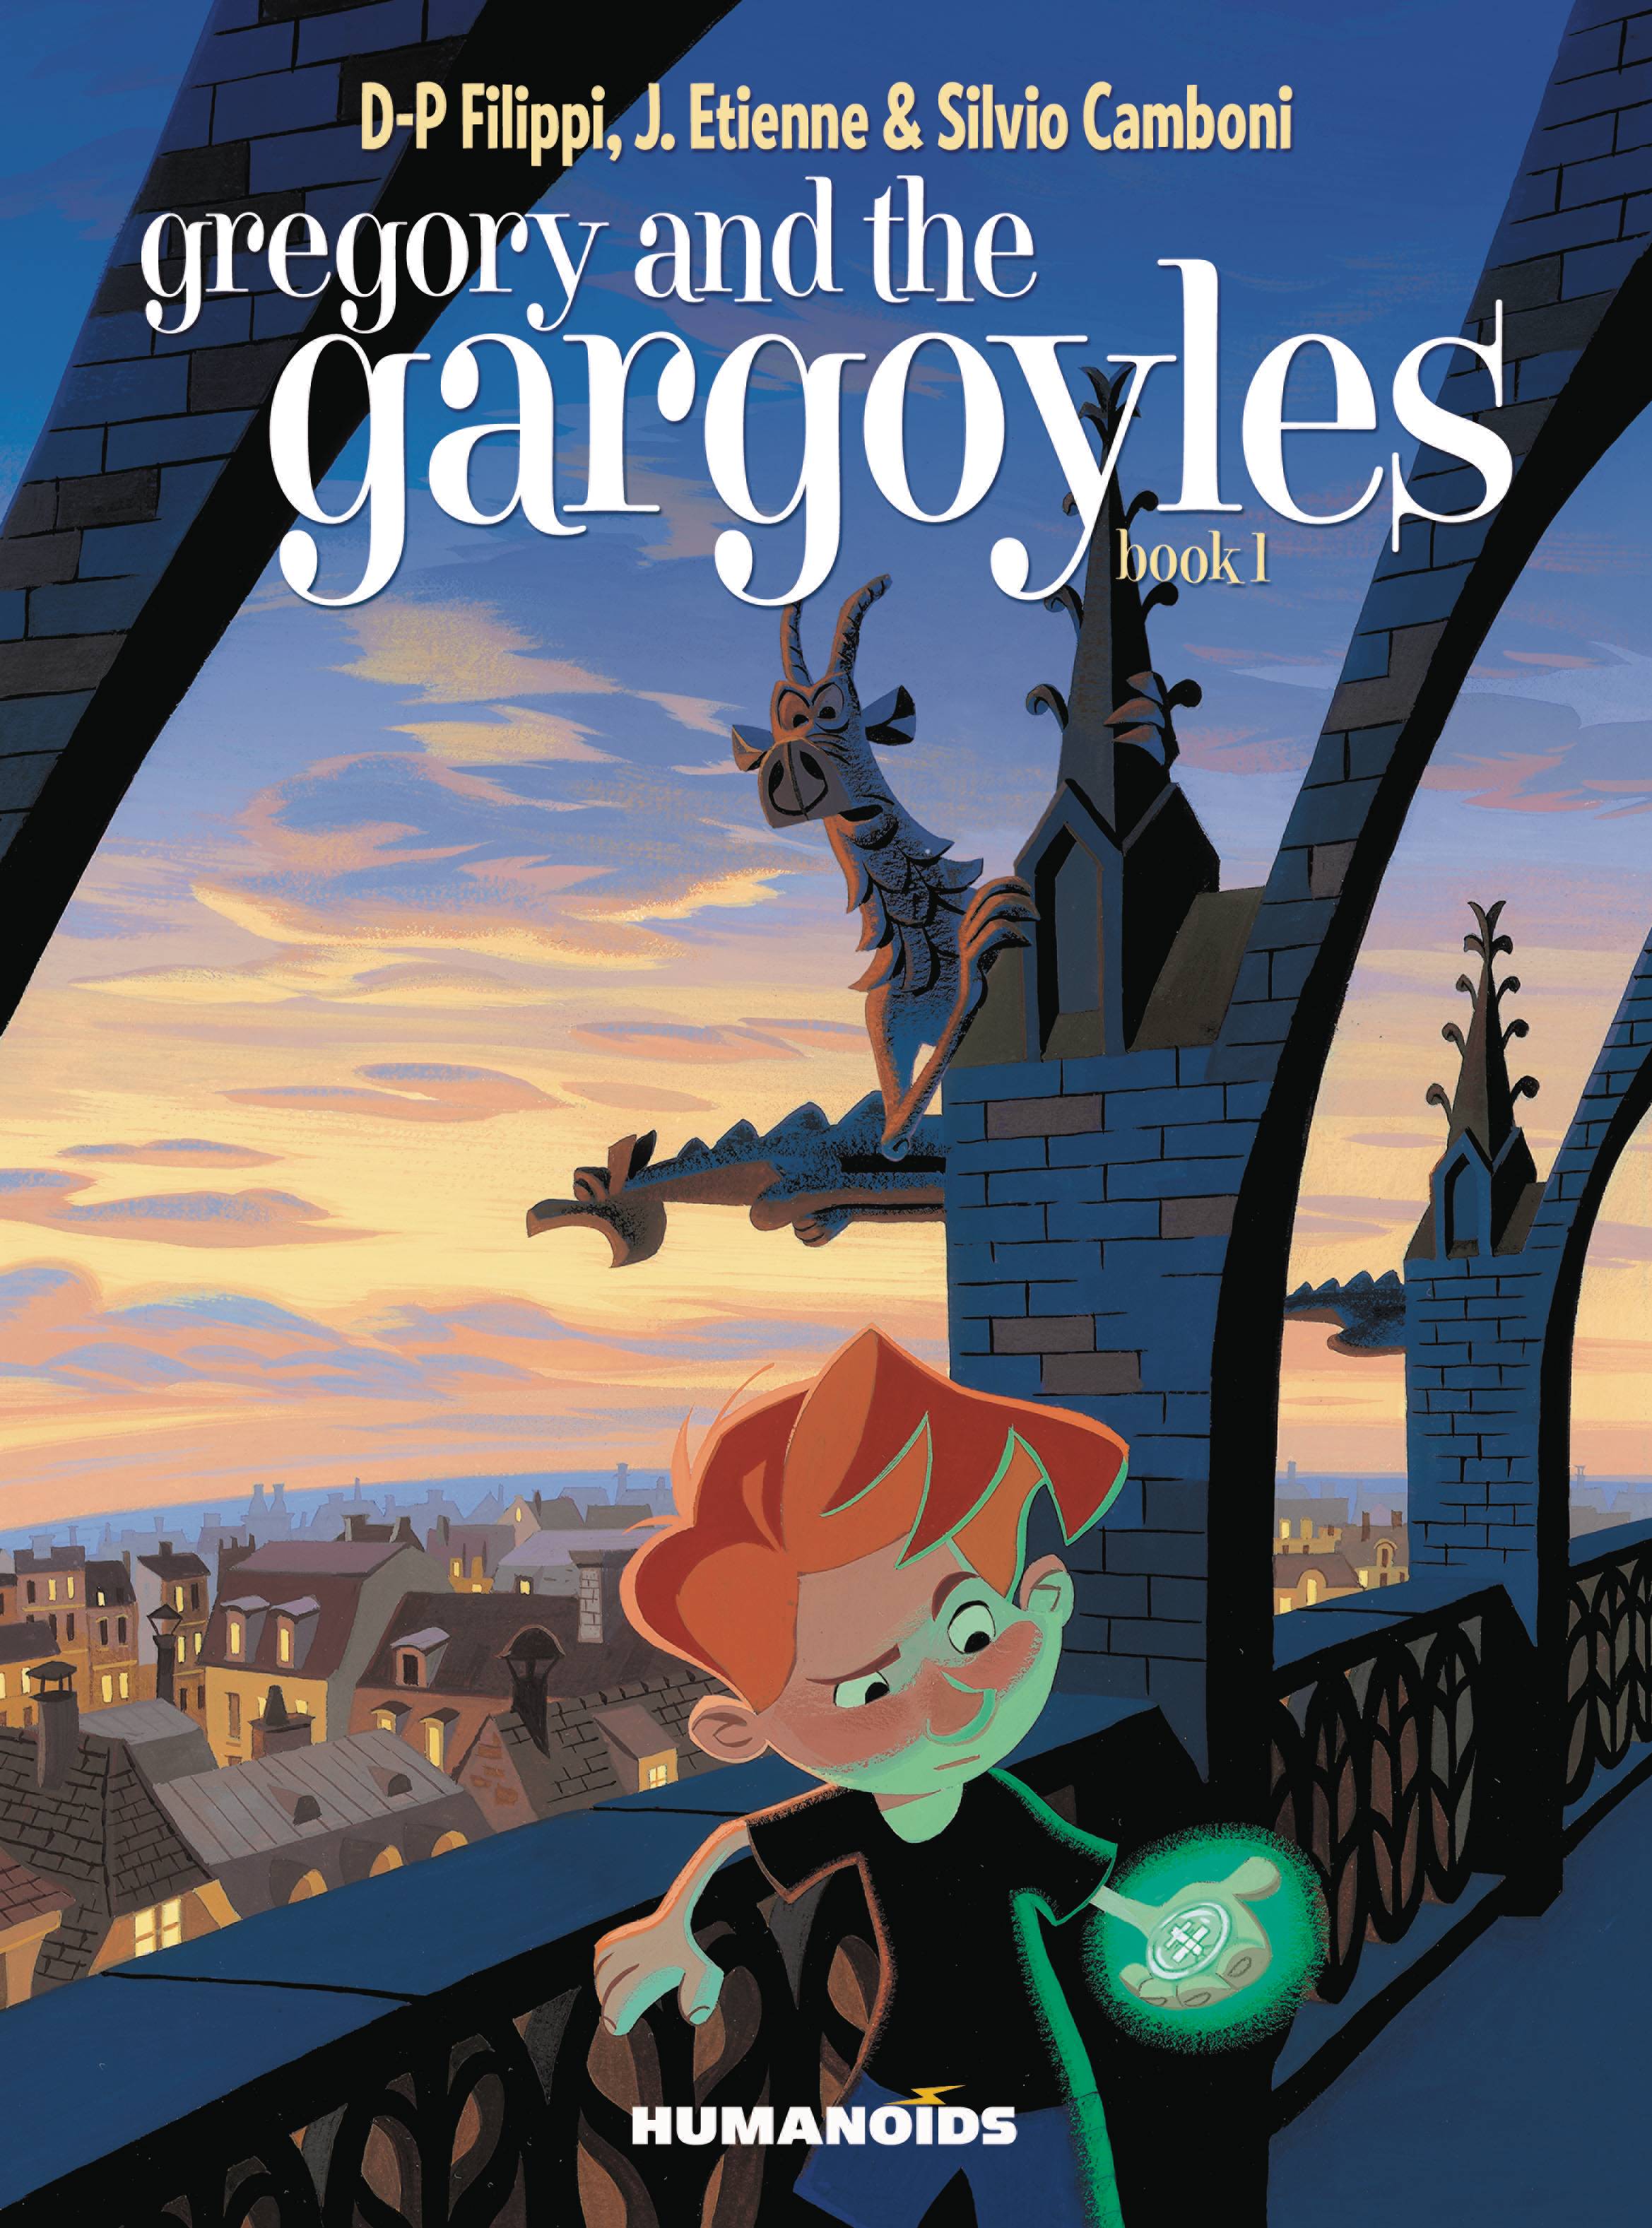 Gregory and the Gargoyles Hardcover Volume 1 (Of 3)